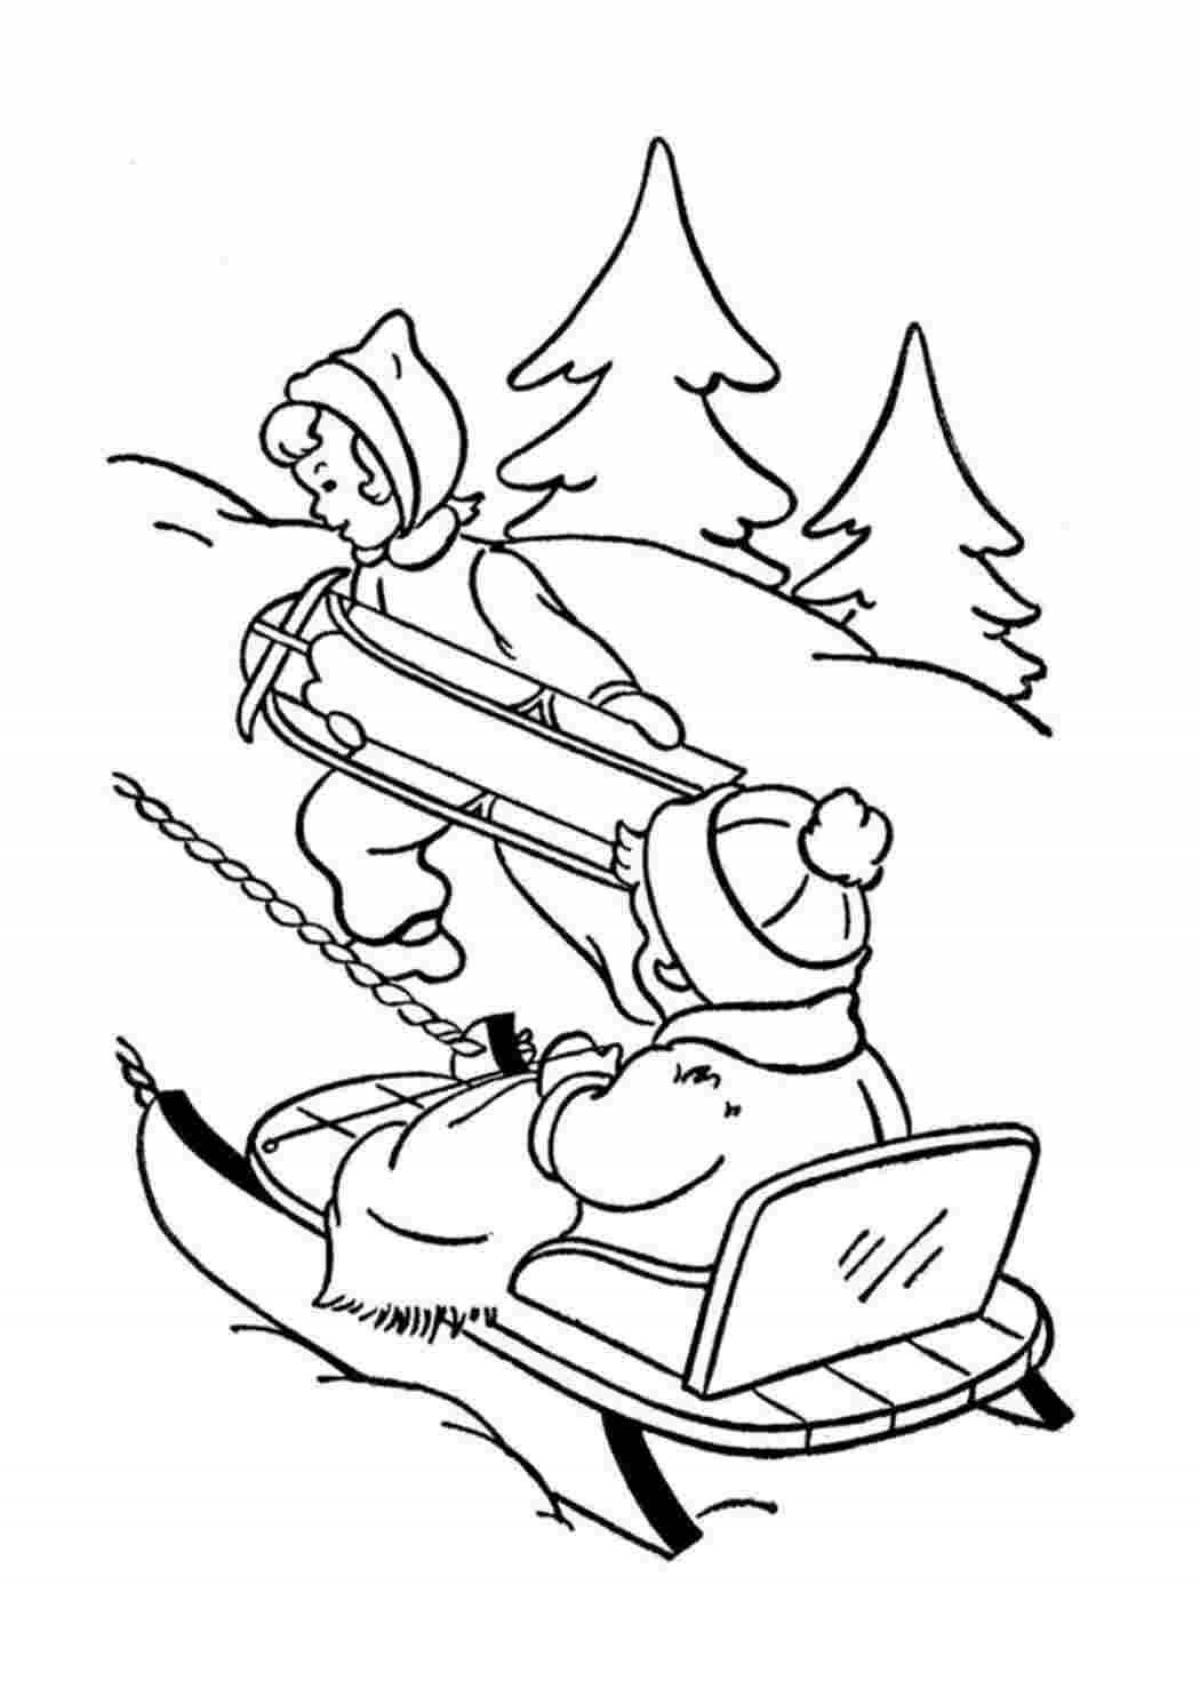 Glittering sled coloring page